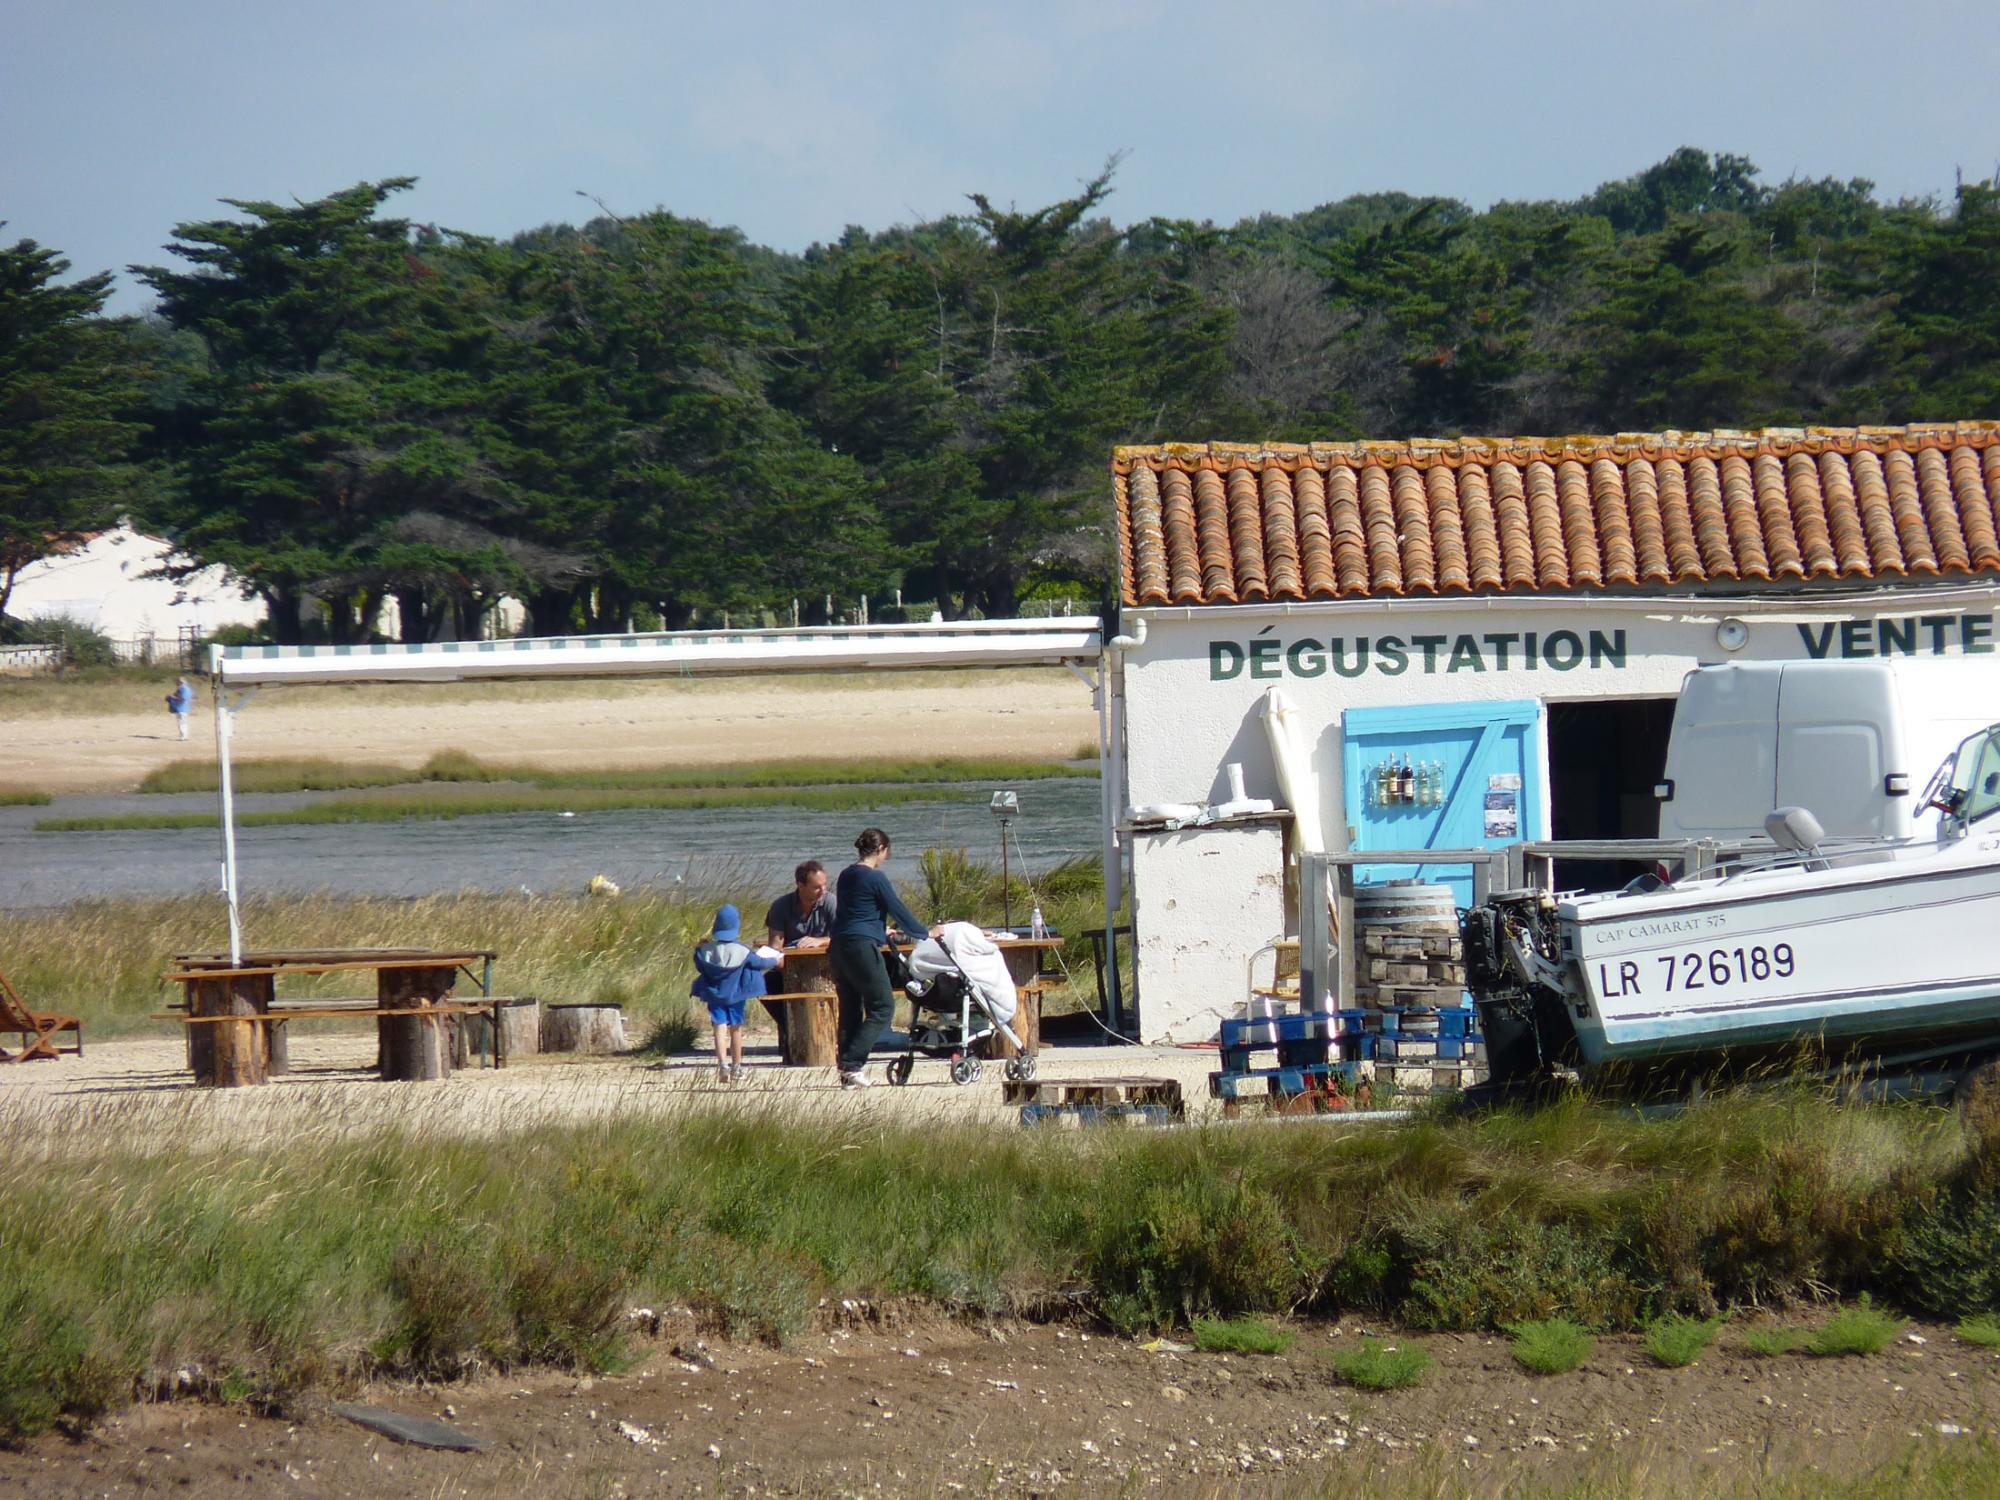 Discovering Aix island's oysters - Crossings by ferry boats Fouras / Aix island